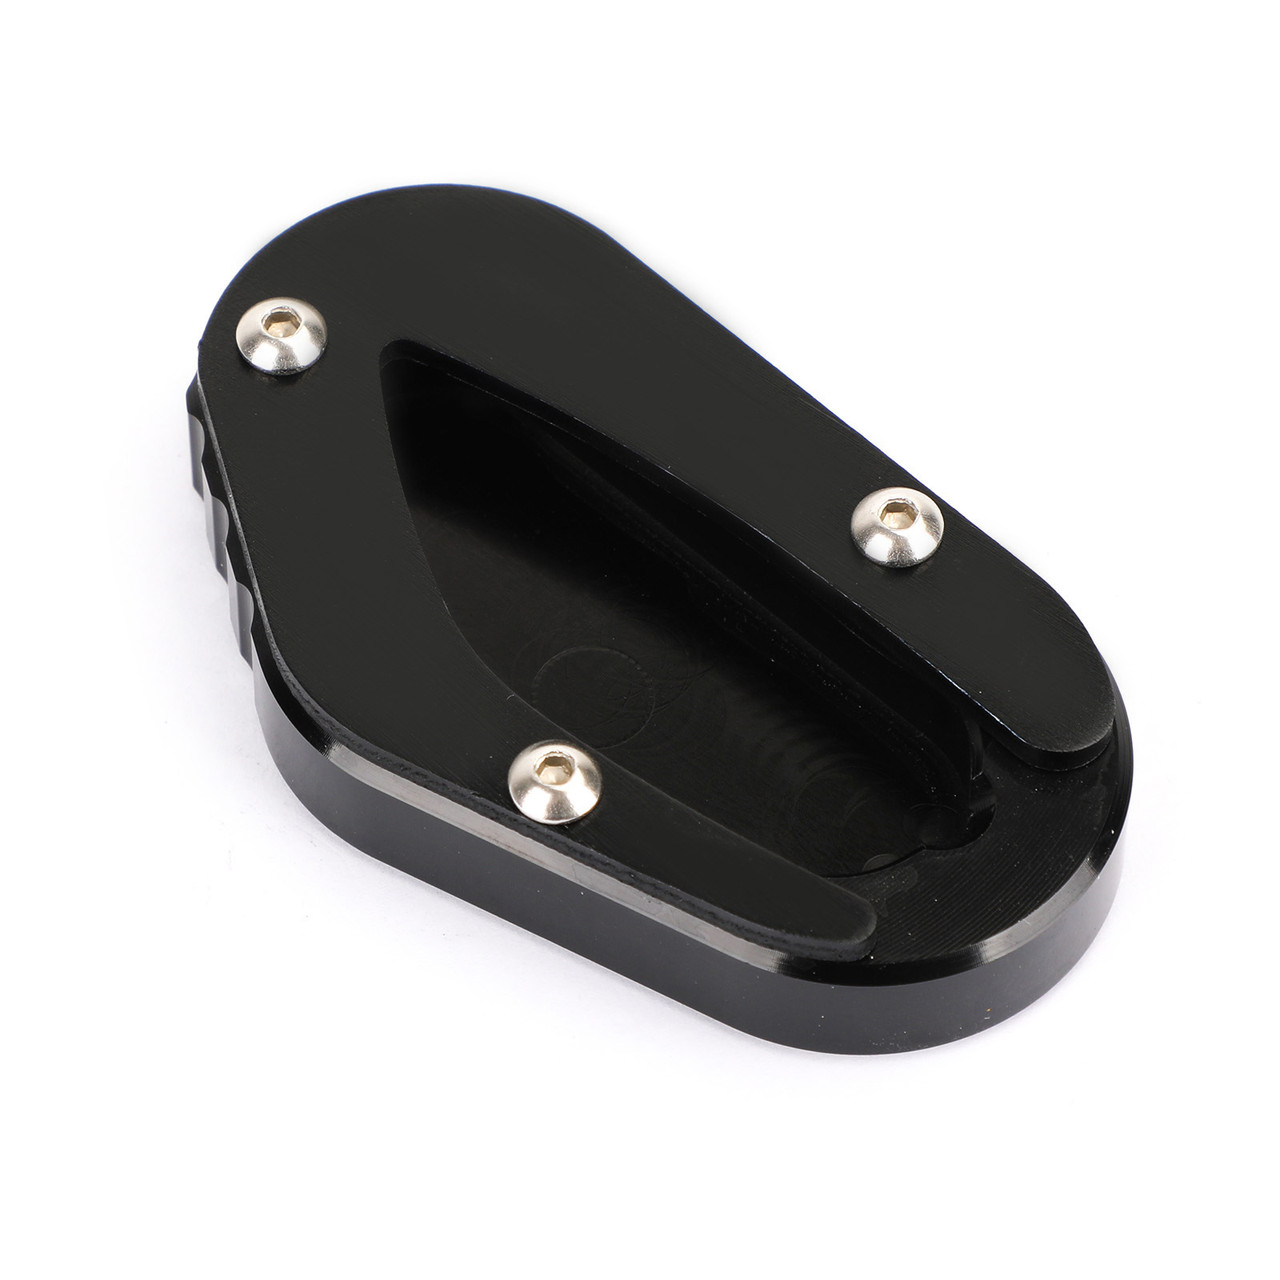 Kickstand Side Stand Extension Pad Fits For TRIUMPH Bonneville T100 2018-2020 TRIUMPH Bonneville T120 2016-2020 Black